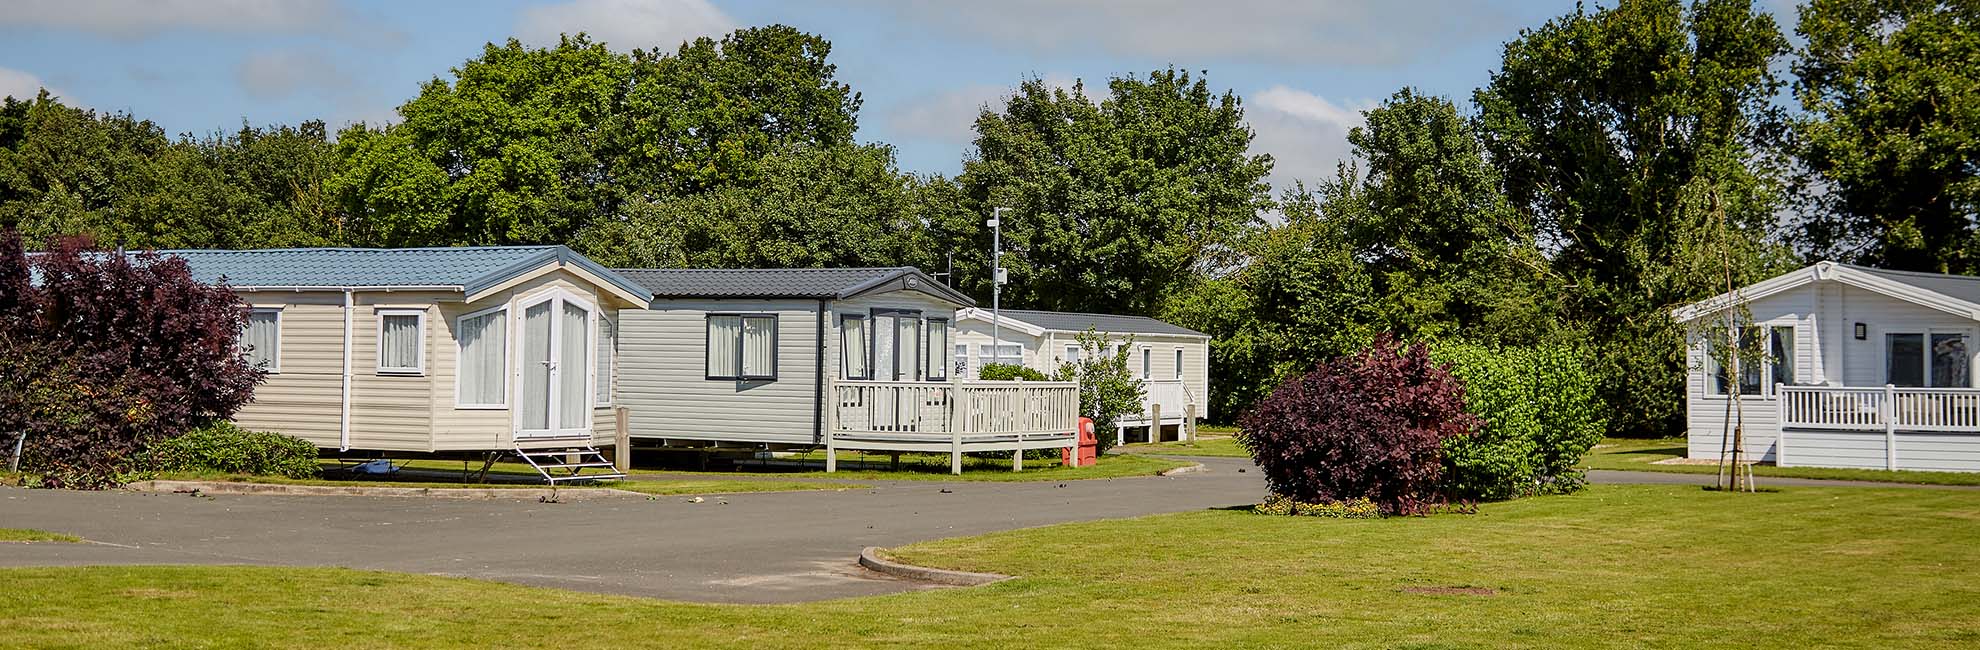 A view of the accommodation across the grass at Breydon Water Holiday Park